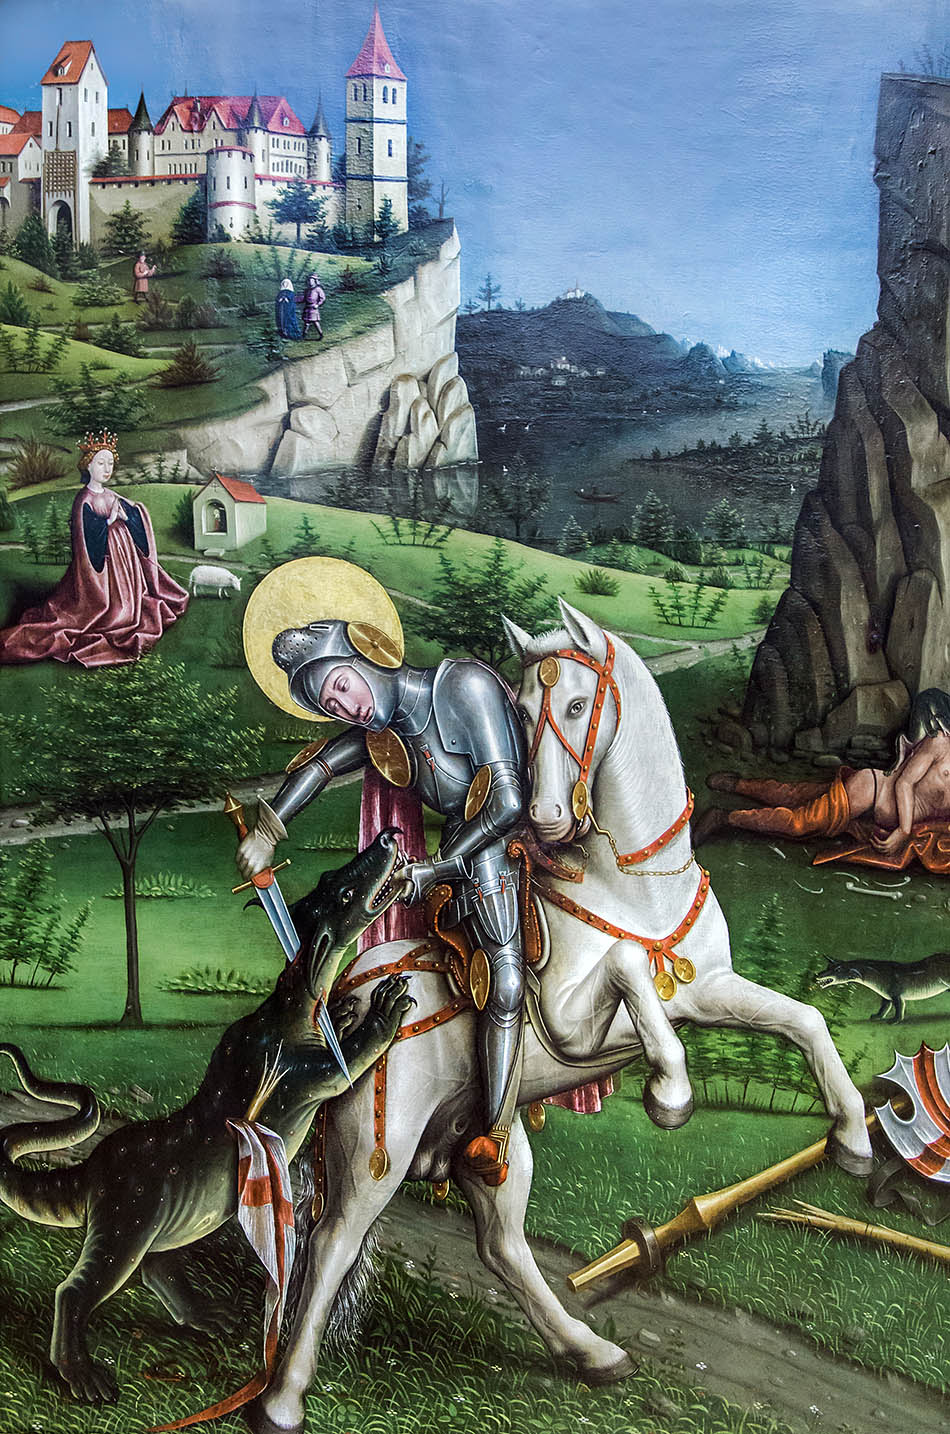 Kunstmuseum Basel, Master of Sierentz, Saint George Fighting with the Dragon